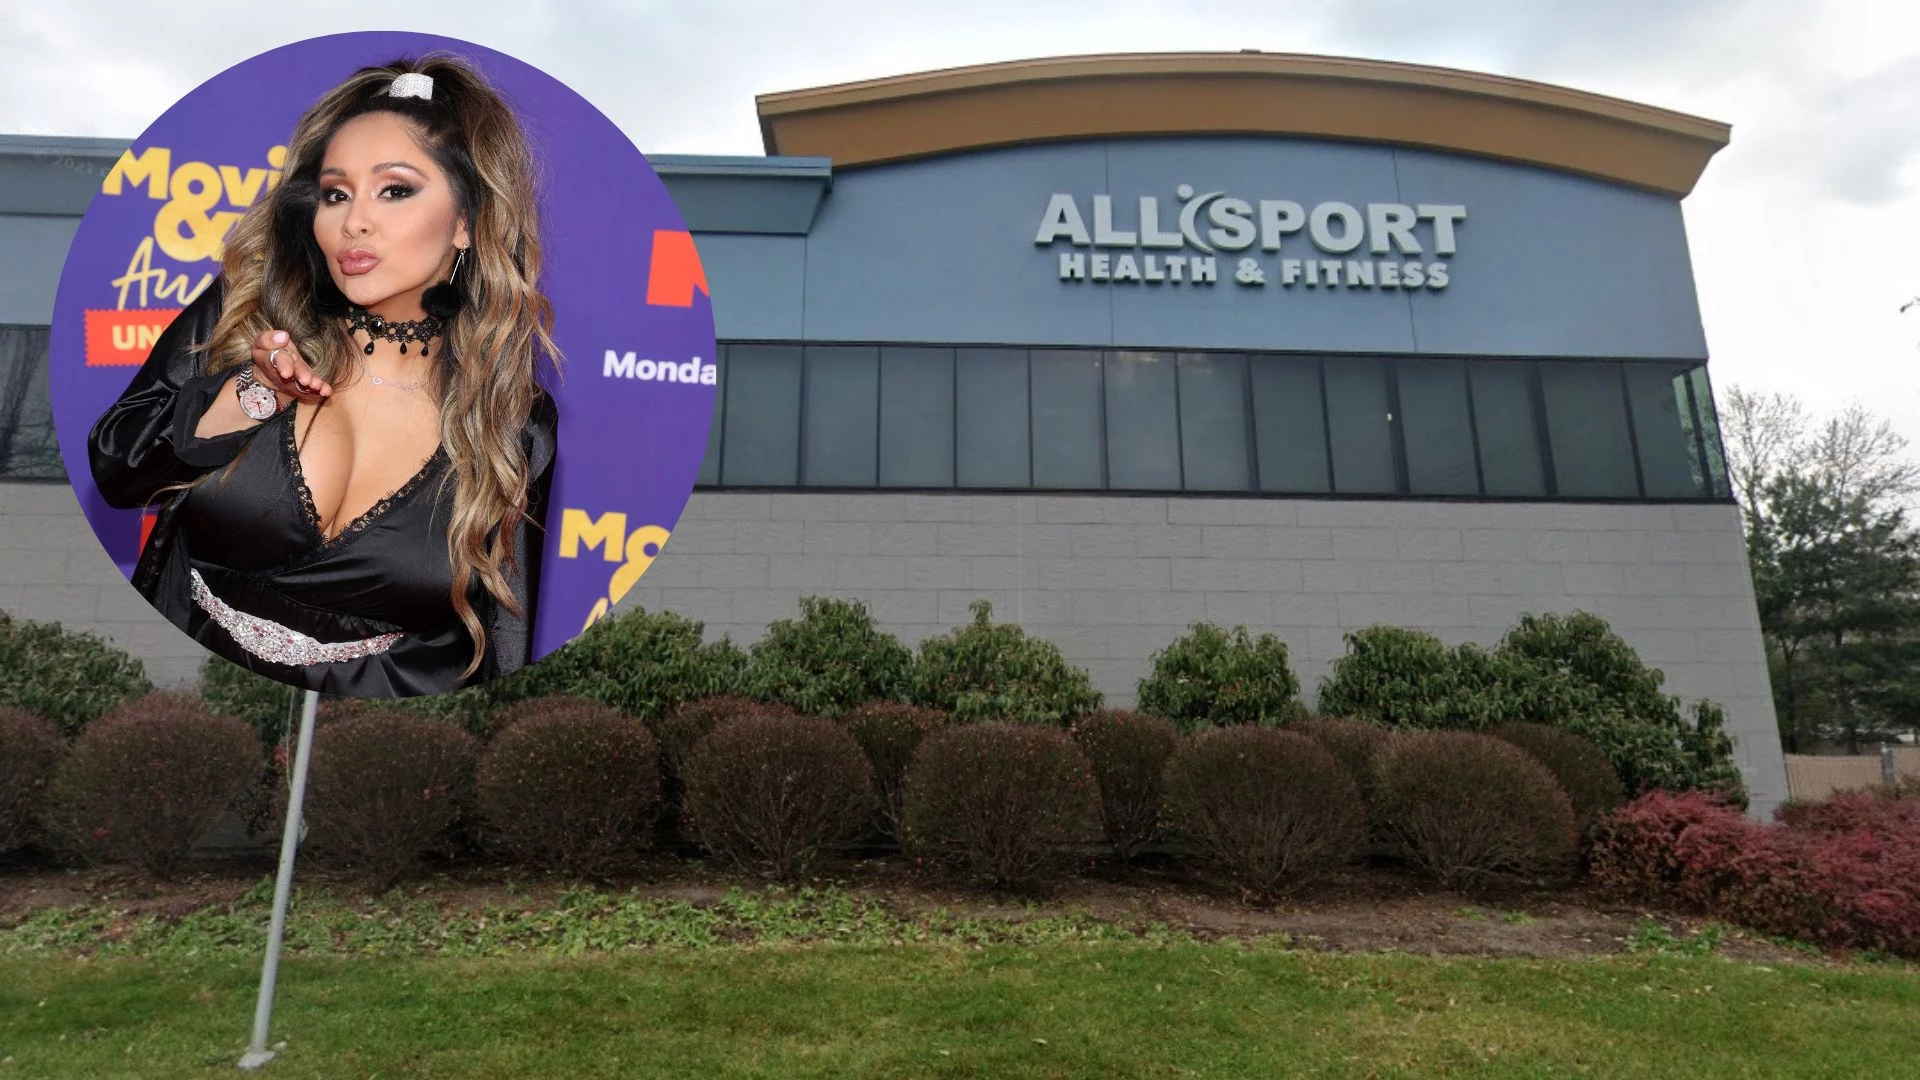 Party's Here! What Was Snooki Doing at All Sport in Fishkill, NY?